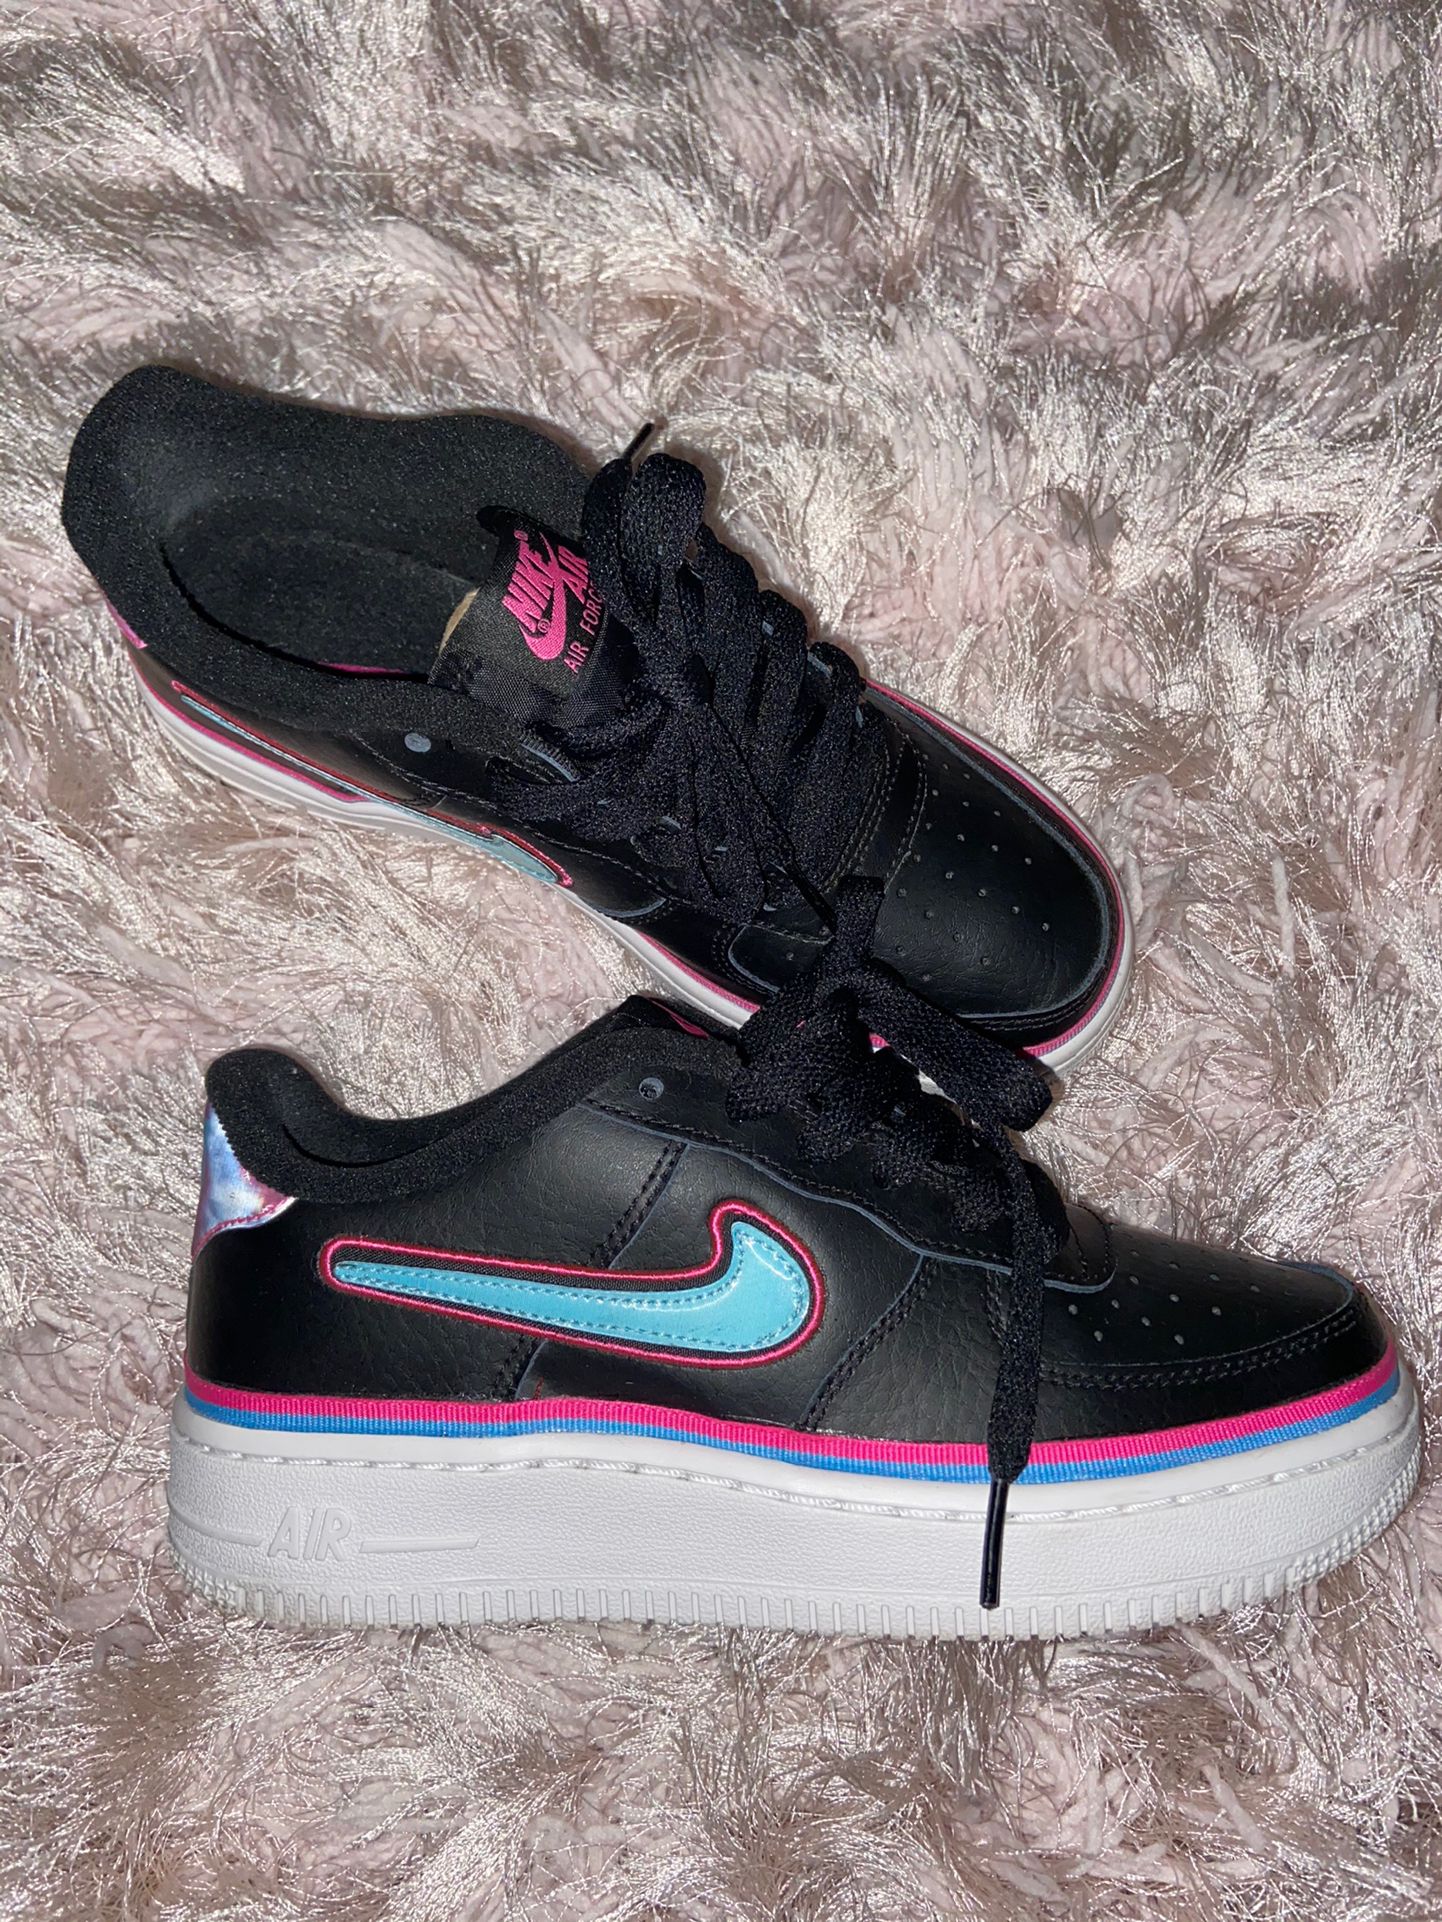 Nike Air Force 1 Low LV8 Miami Vice (GS)